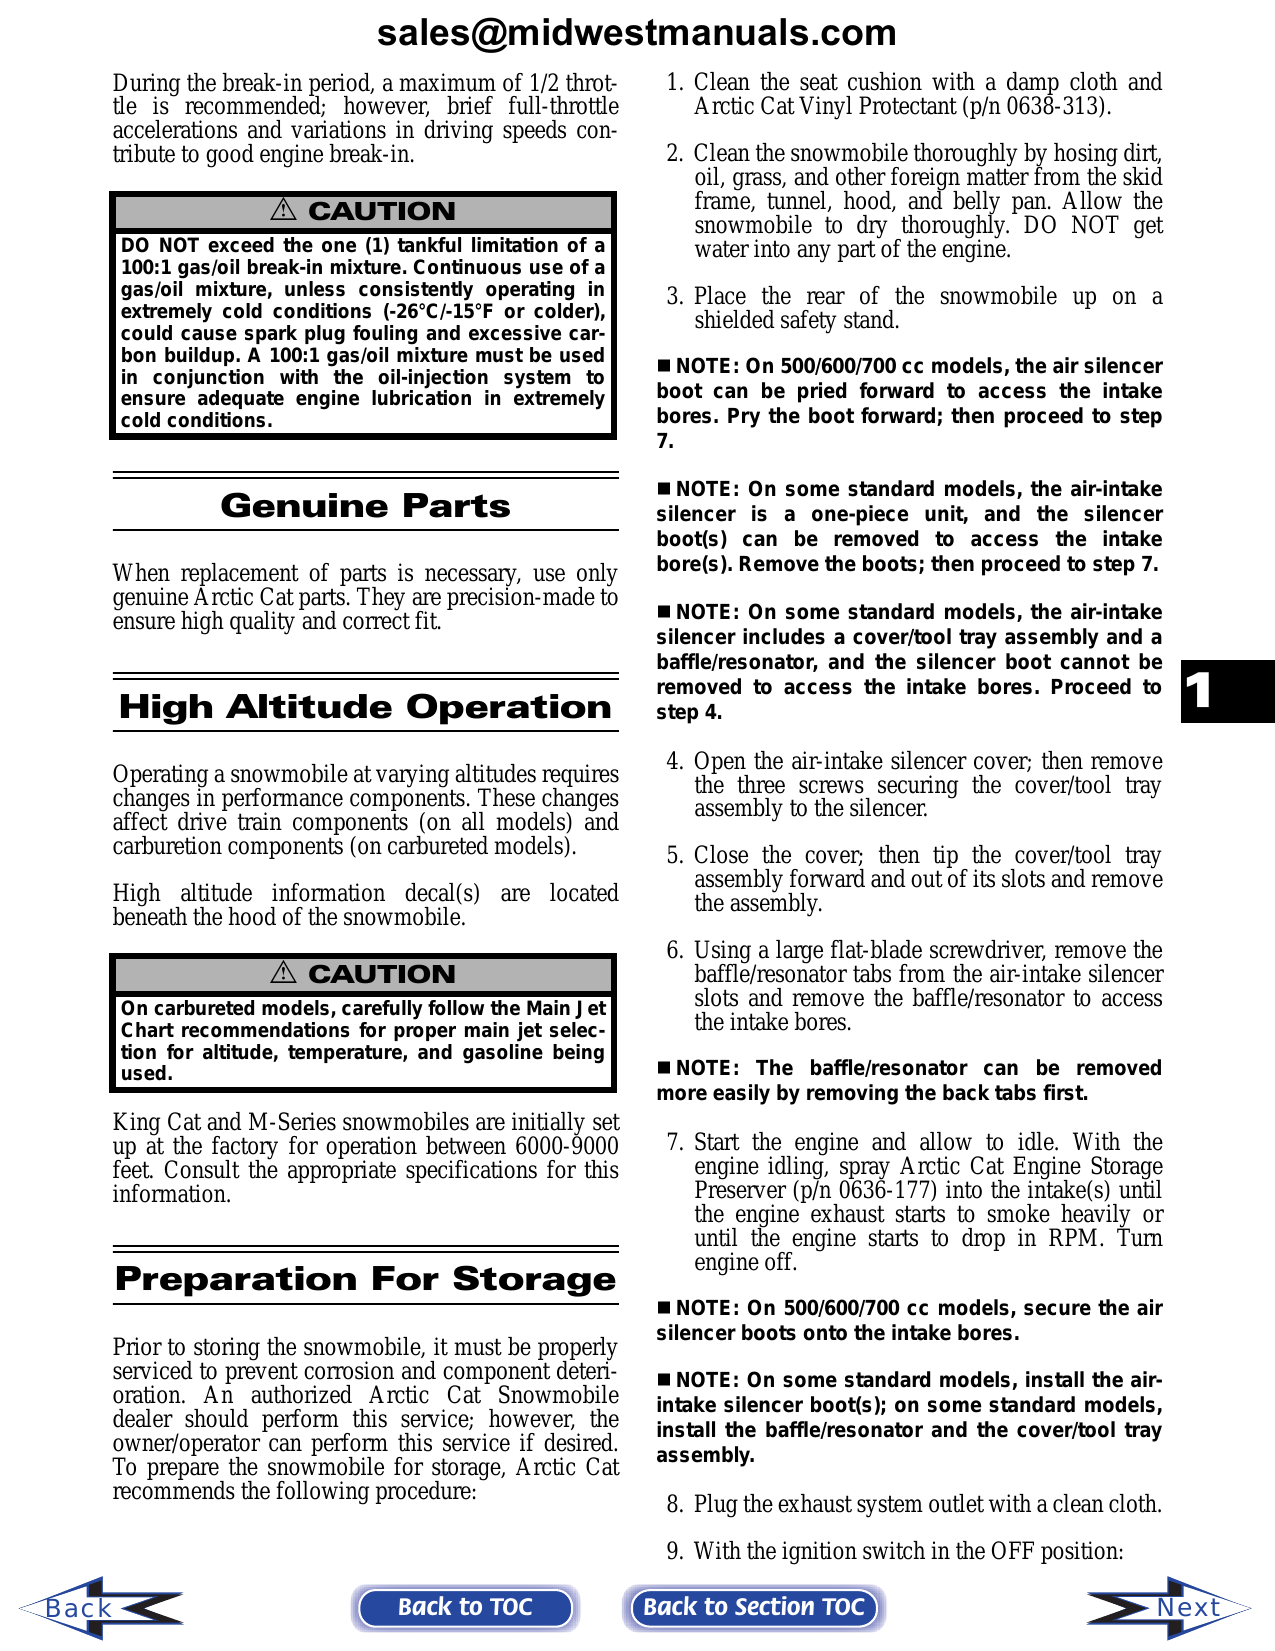 2006 Arctic Cat 2- and 4-stroke snowmobile service, shop manual Preview image 5